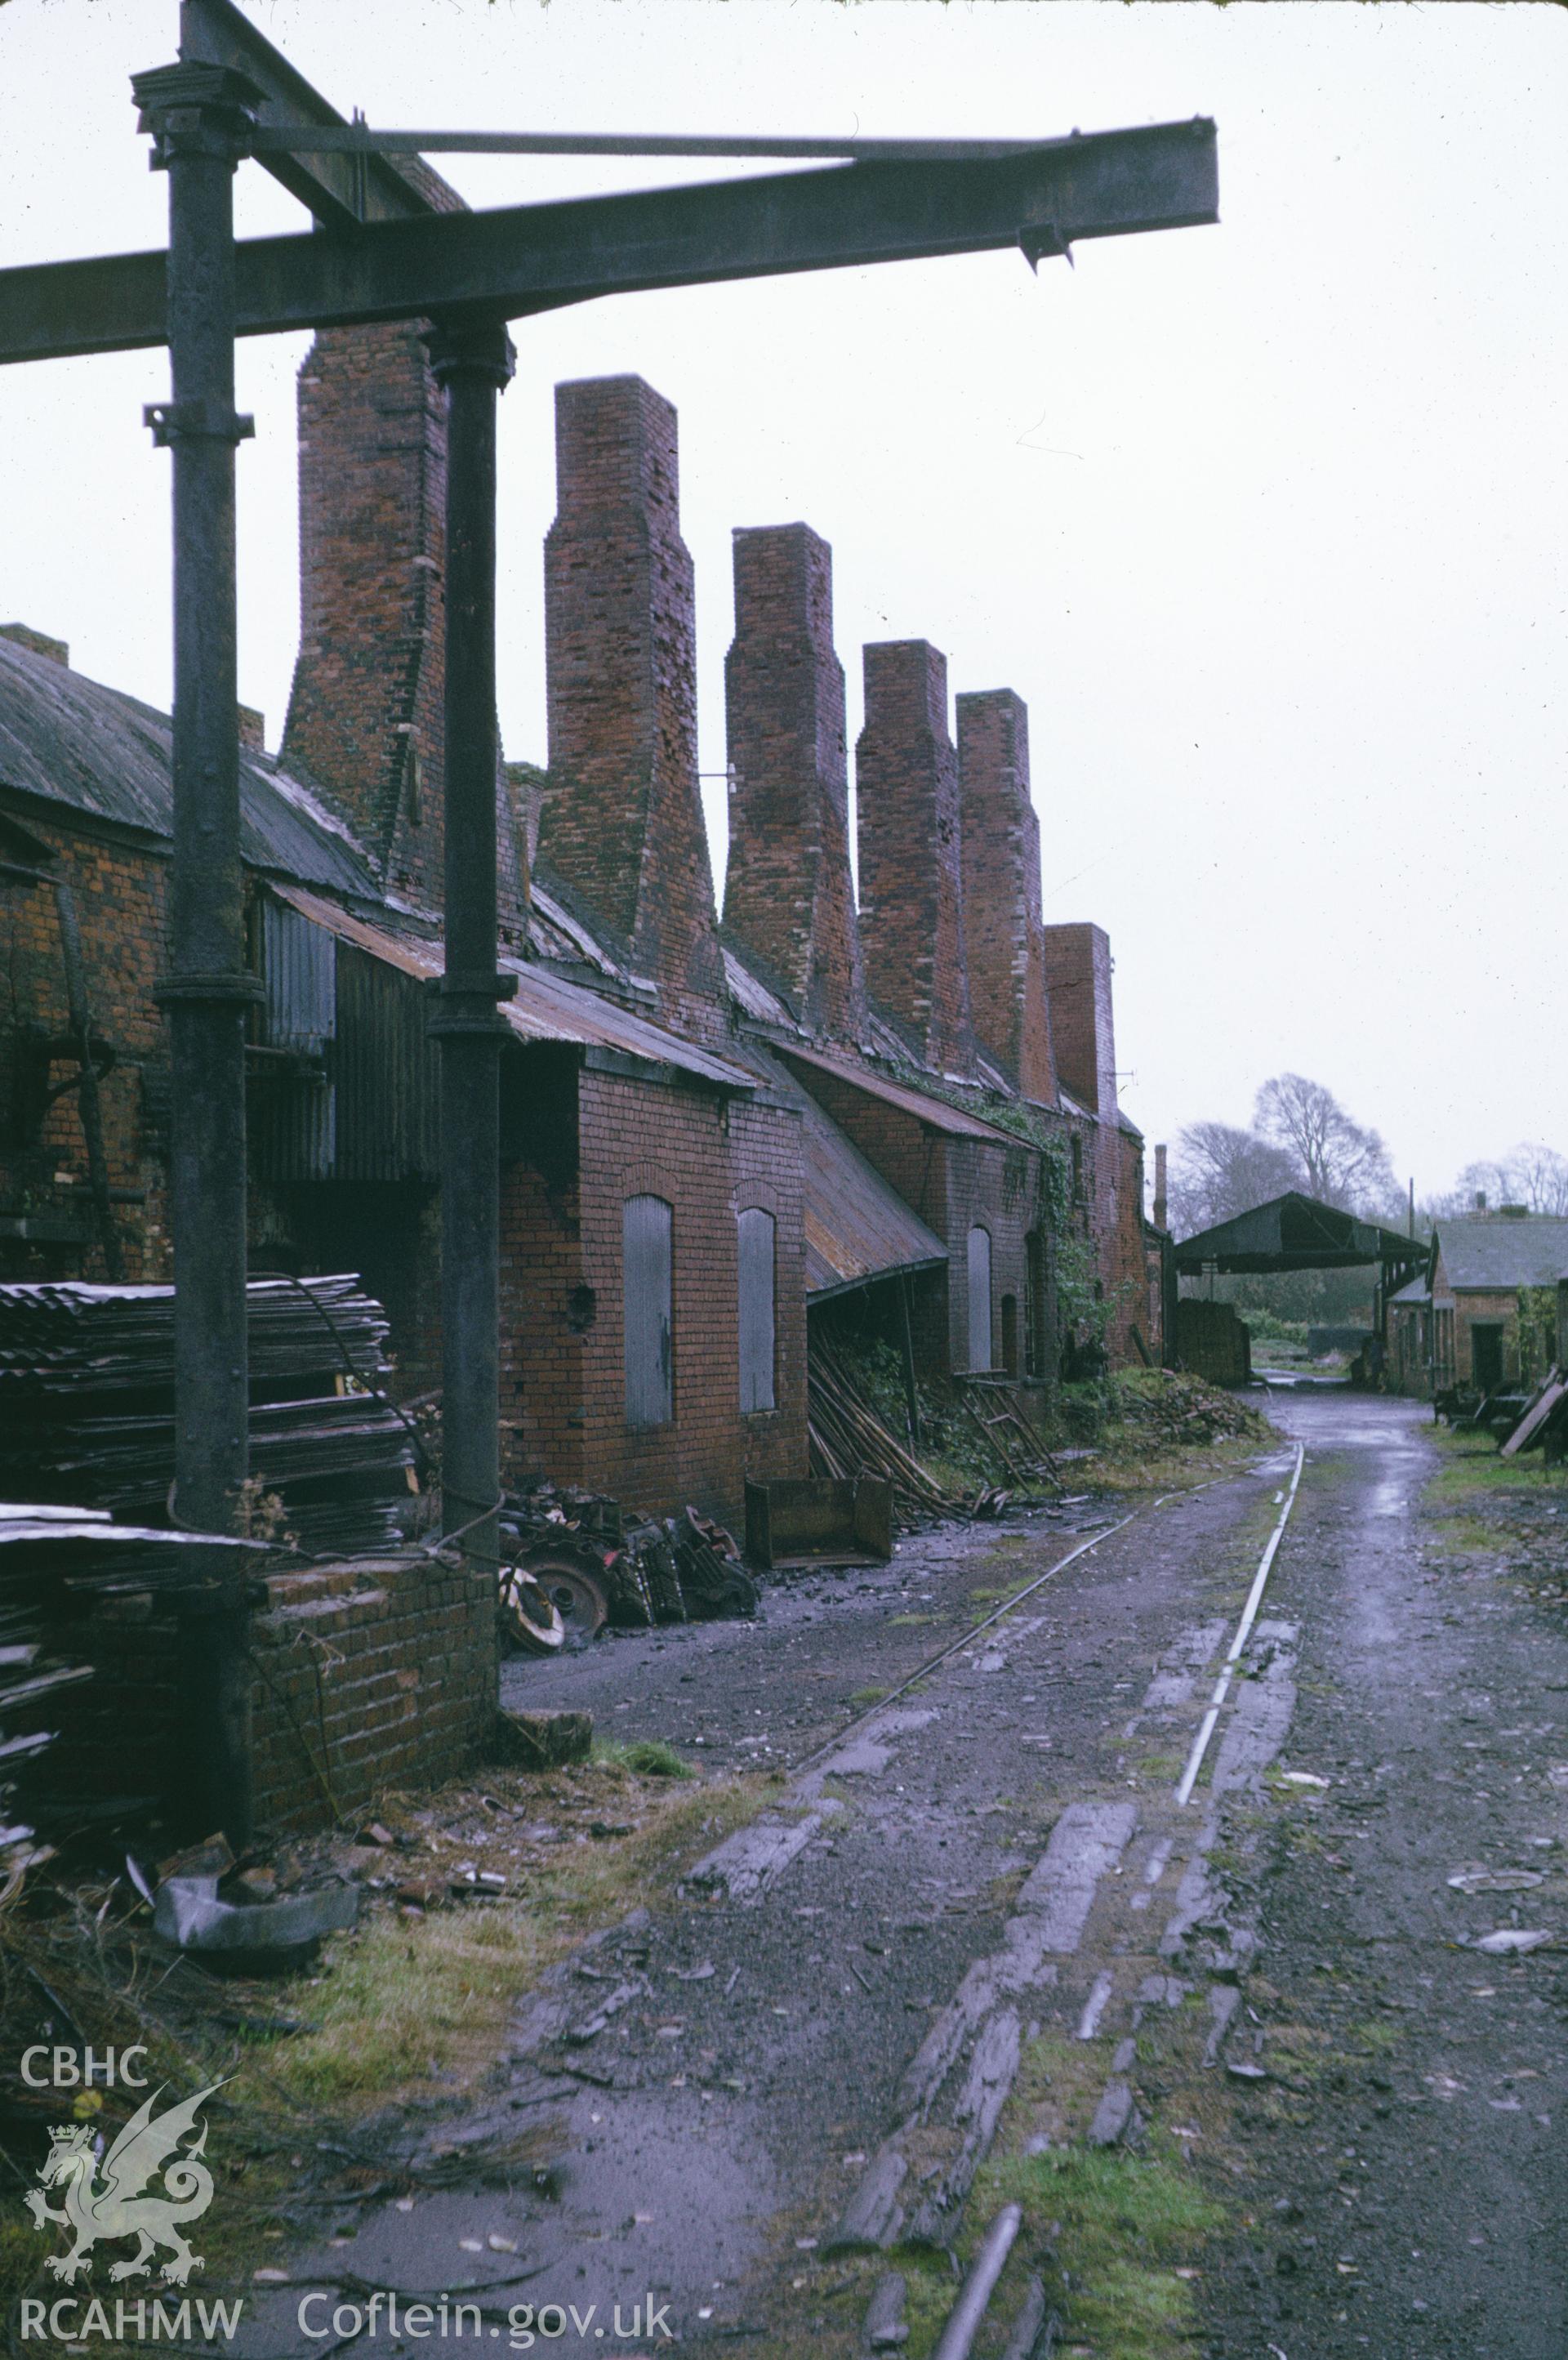 35mm colour slide showing the Tin House at Kidwelly Tin-Plate Works, Carmarthenshire, by Dylan Roberts, undated.